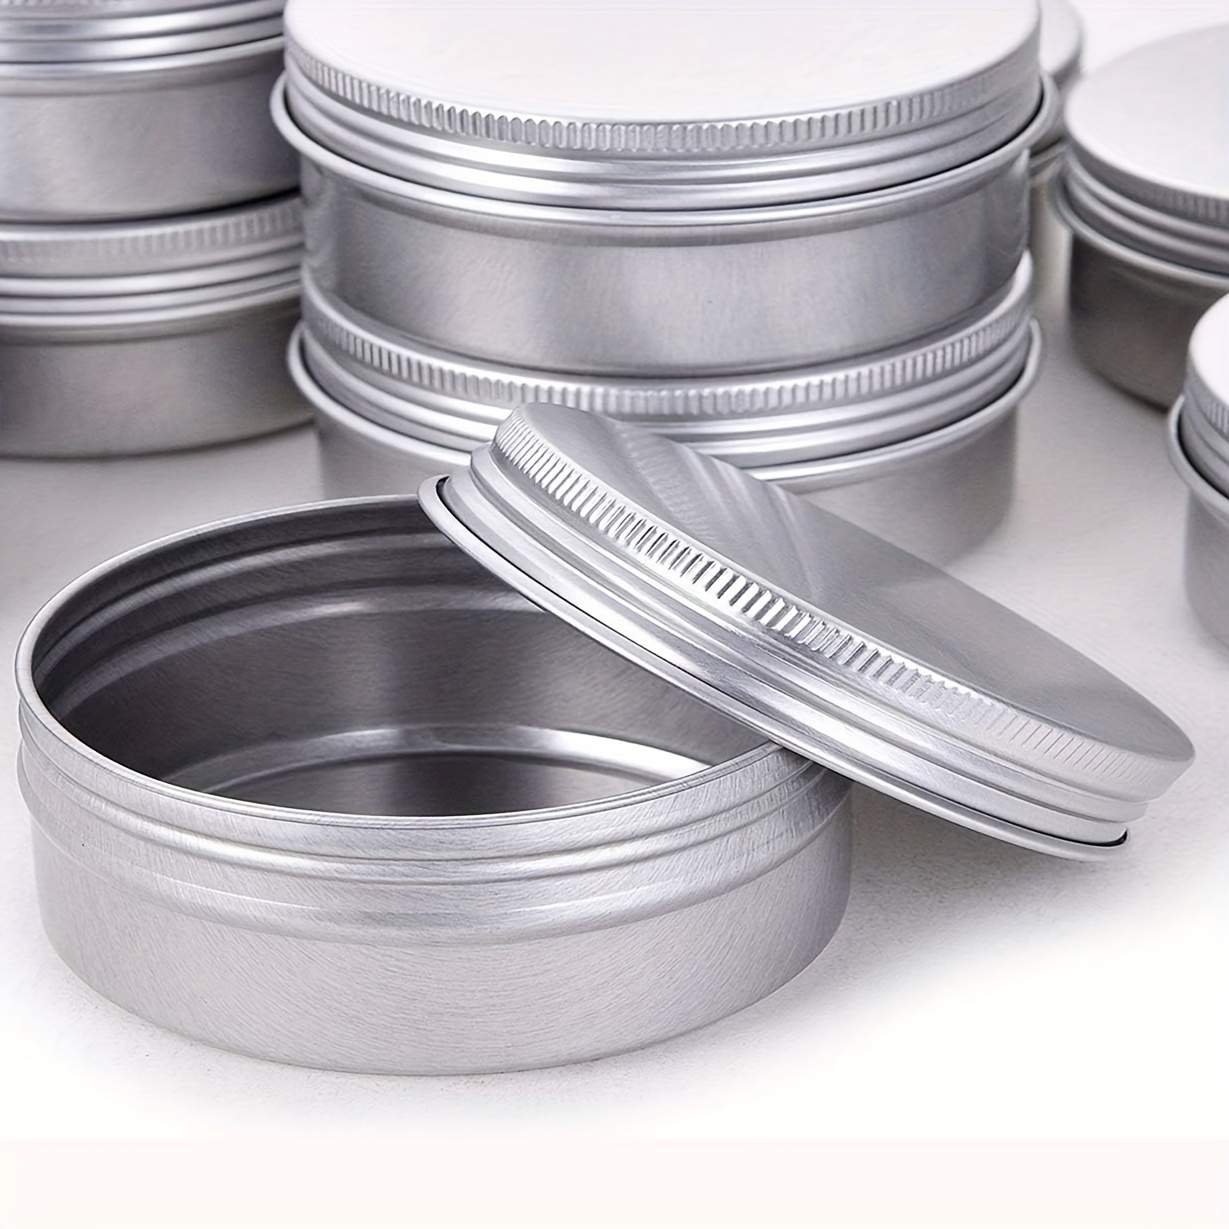 Sample Containers, Tinned-Metal, 16oz (12/Pk)